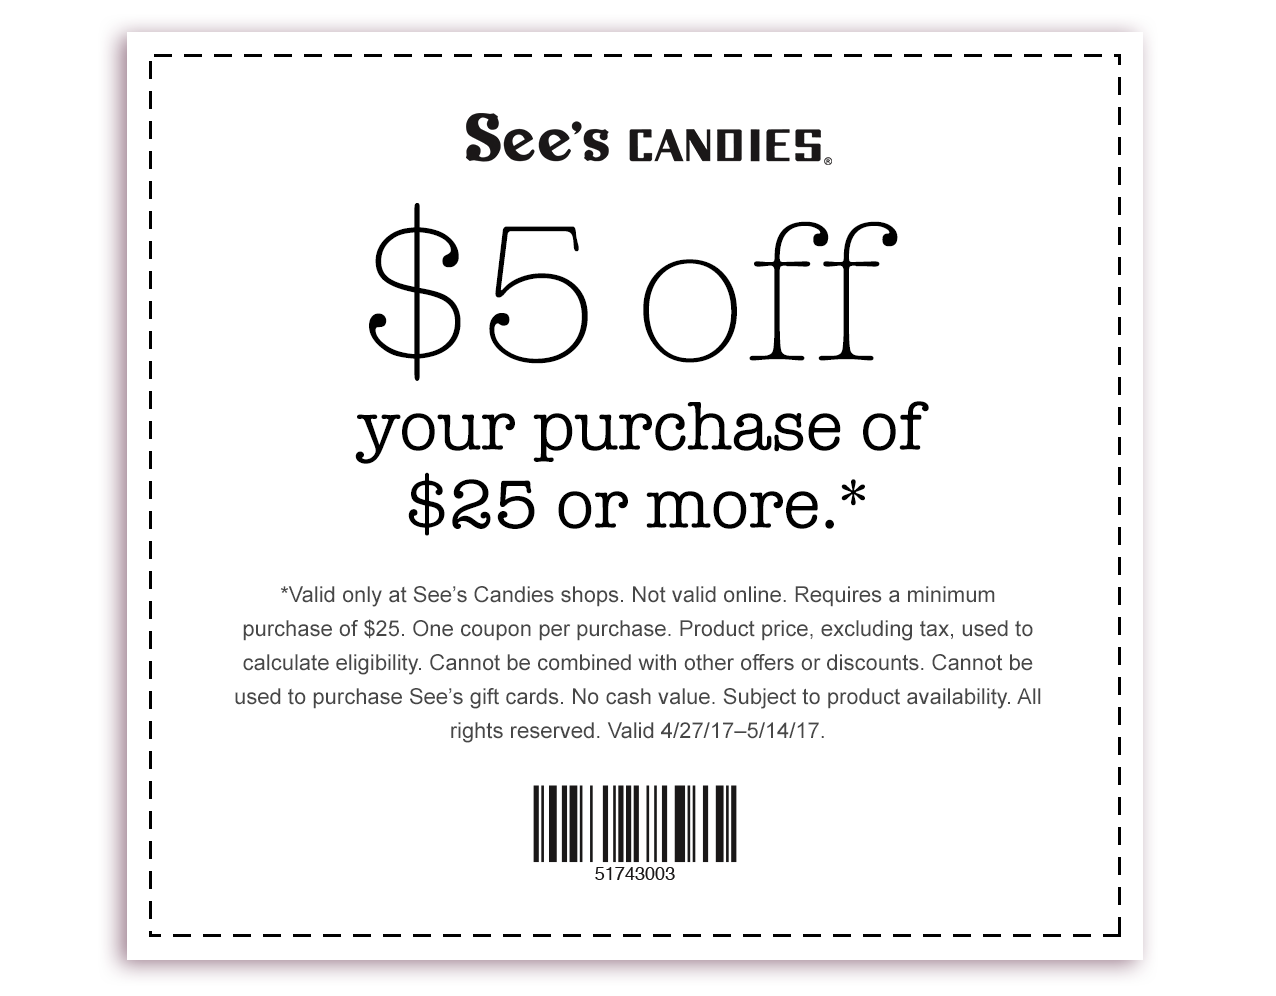 Sees Candies Coupons Printable In Store